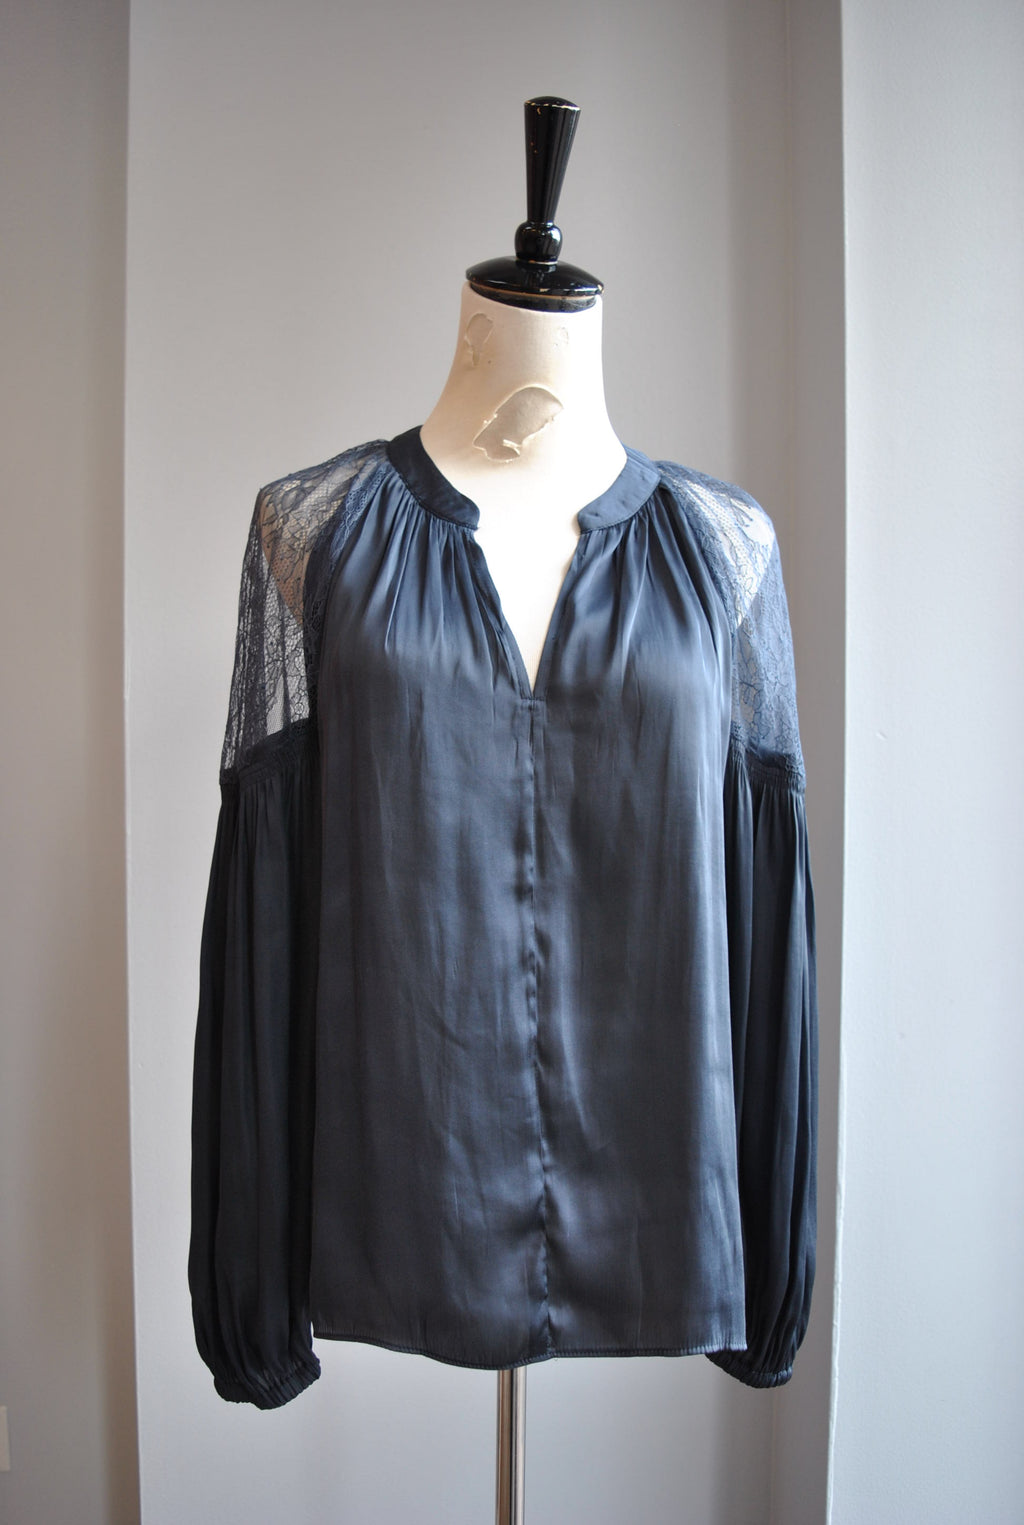 NAVY BLUE SILKY BLOUSE WITH LACE